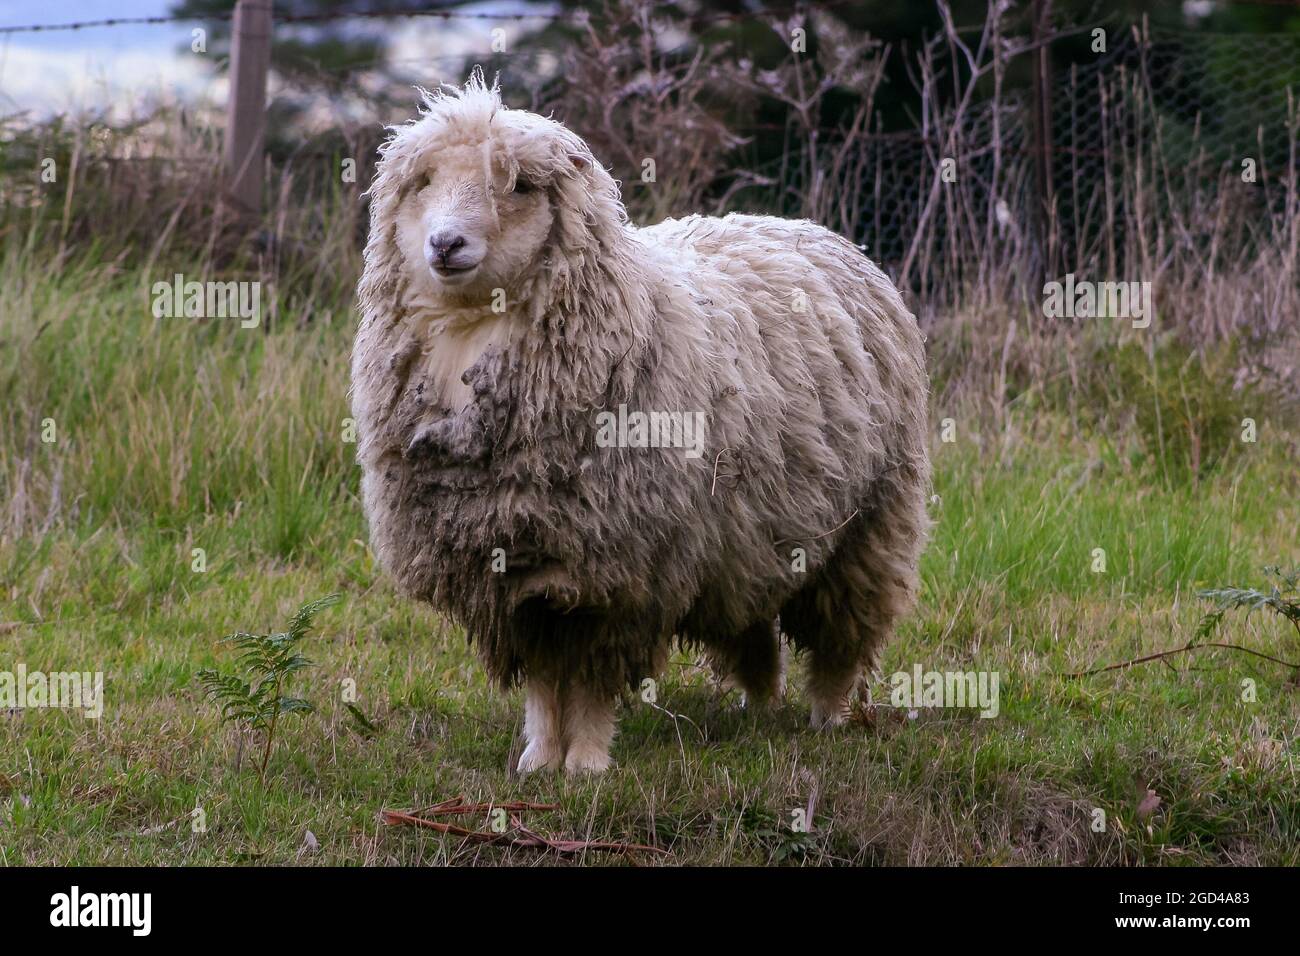 Woolly merino sheep looking bedraggled in a cold environment Stock Photo